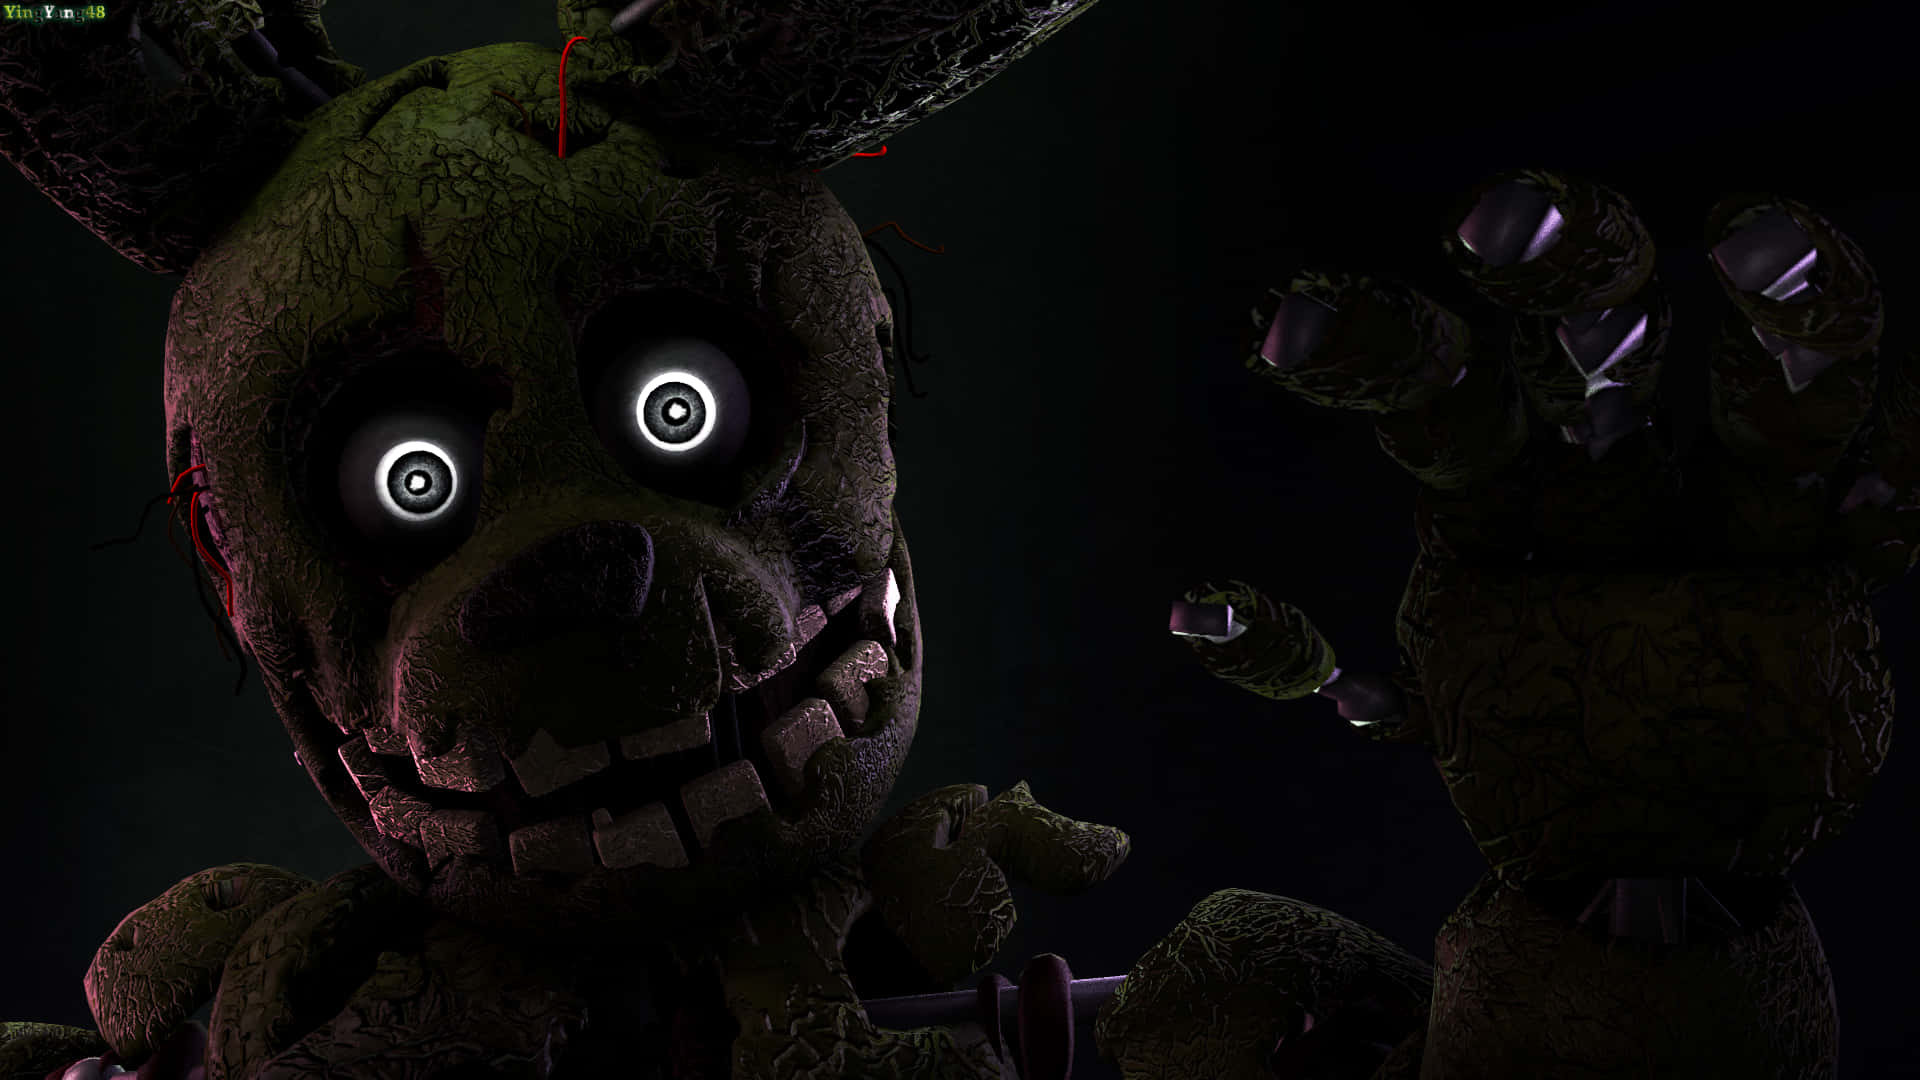 An Intriguing Peek Into The Unnerving World Of Five Nights At Freddy's.